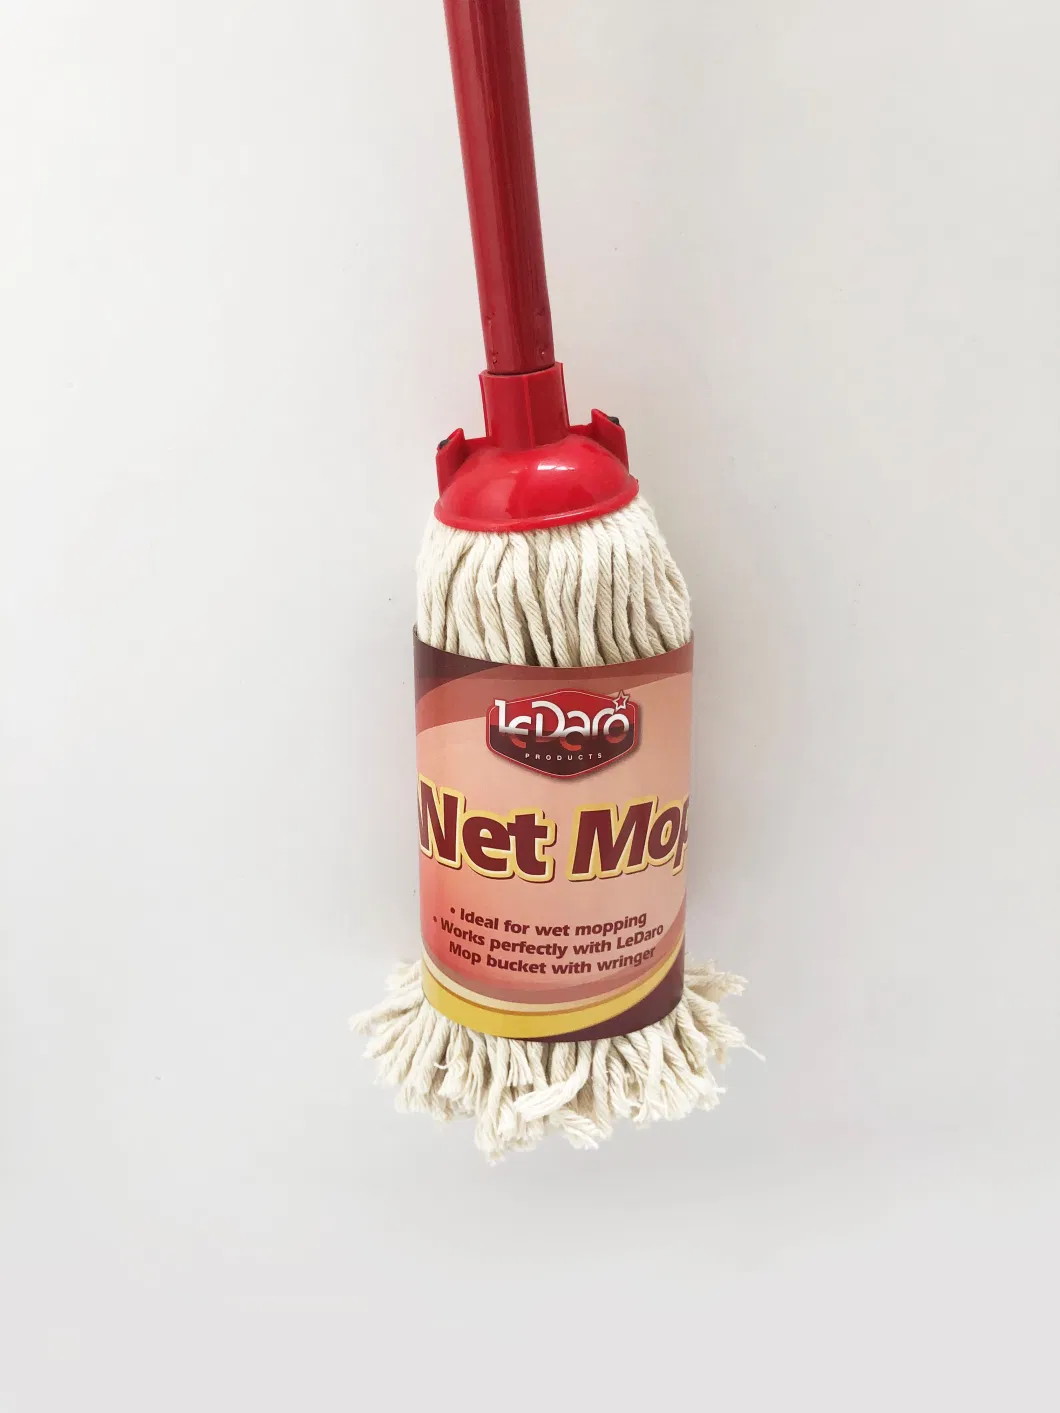 Wholesales Price Cotton Mop Natural White Mop Head 200 Grams In70% Cotton&30% Polyester Cotton Yarn 12ply for All Floor Cleaning